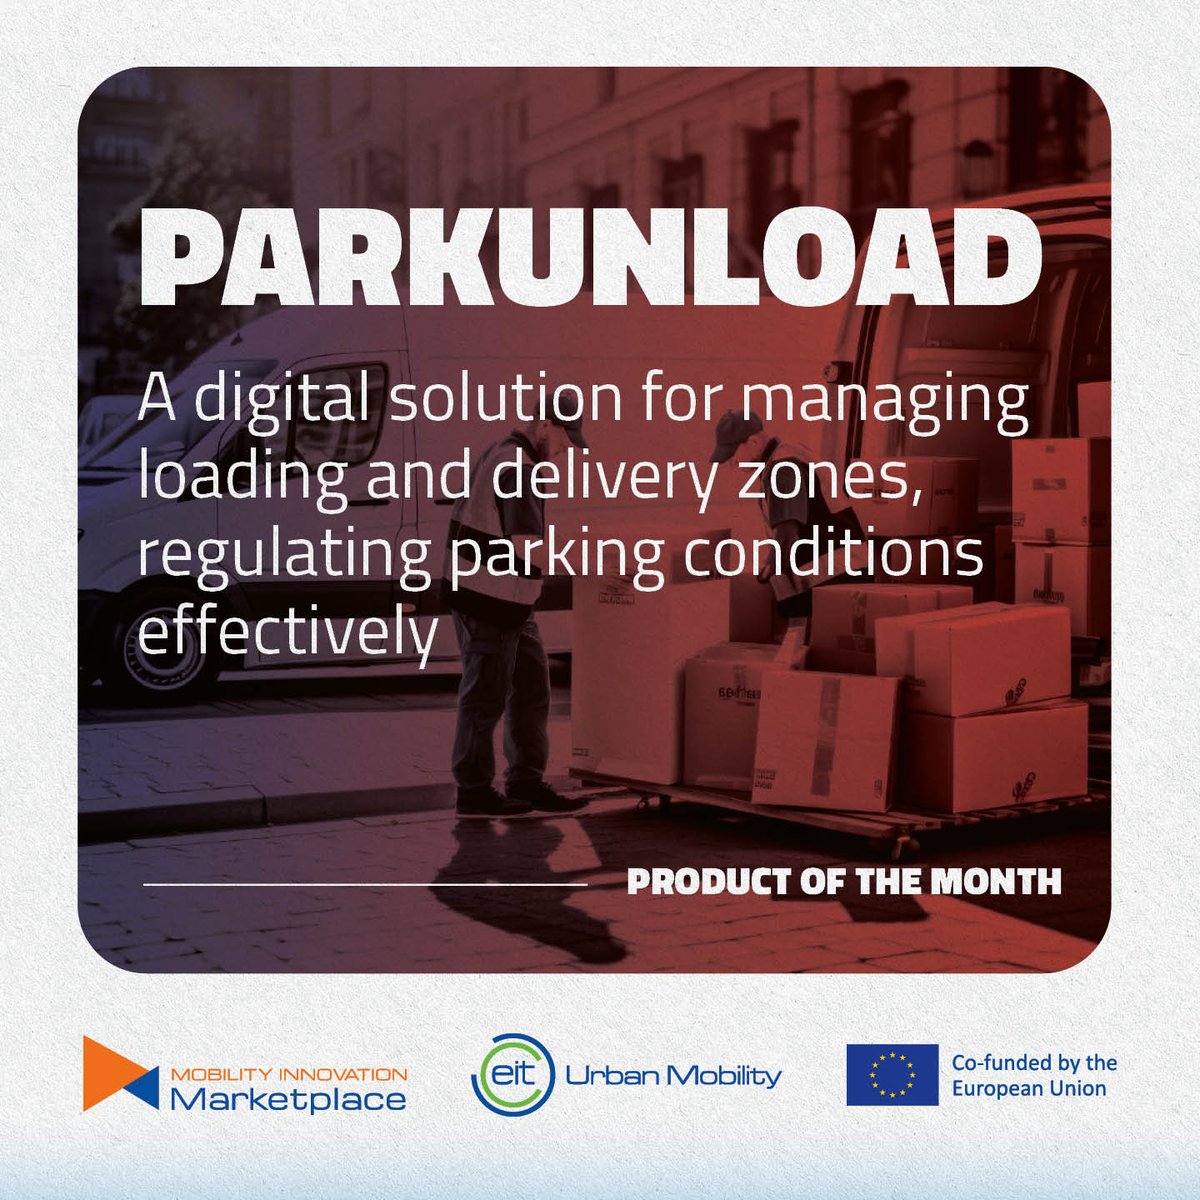 🅿️ Addressing parking challenges, it's possible! 🚚 @parkunload digital solution optimised short-term loading zones in Torrelavega, resulting in: 💨 Reduced congestion ✅ Promoted compliance 🏷️ Empowered local commerce Learn more: marketplace.eiturbanmobility.eu/best-practices…